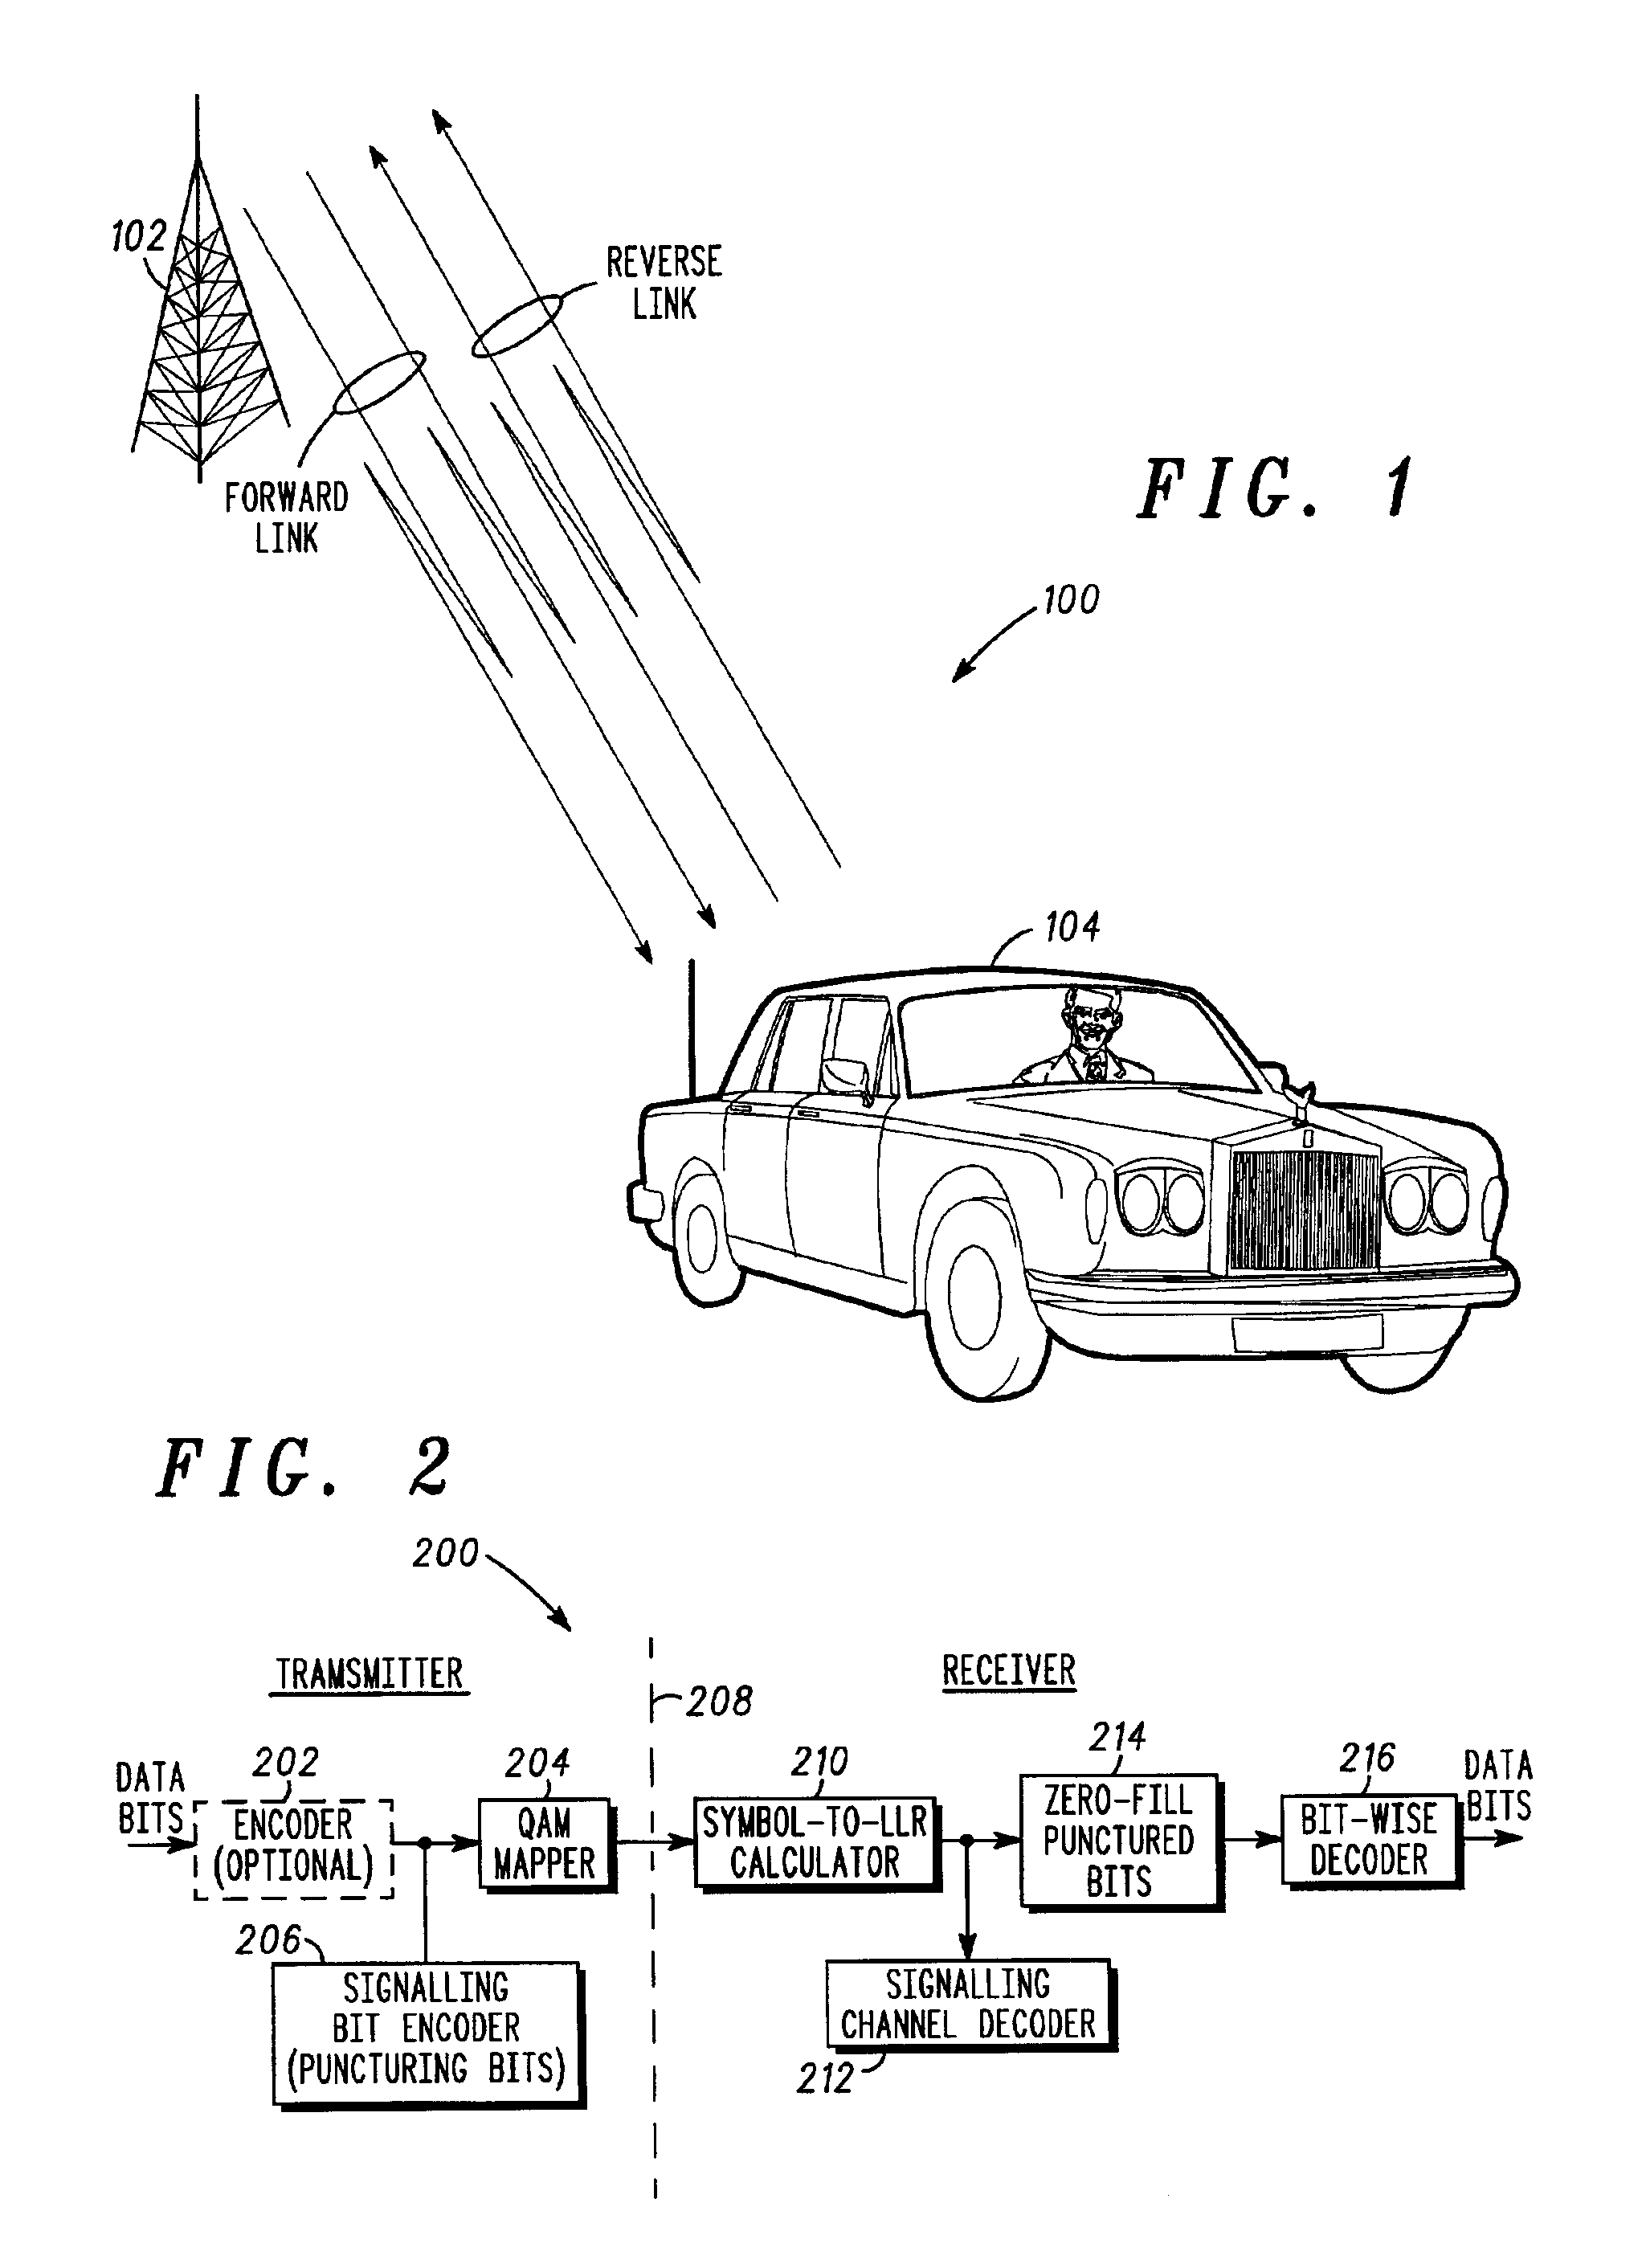 Method and apparatus for adaptive signaling in a QAM communication system